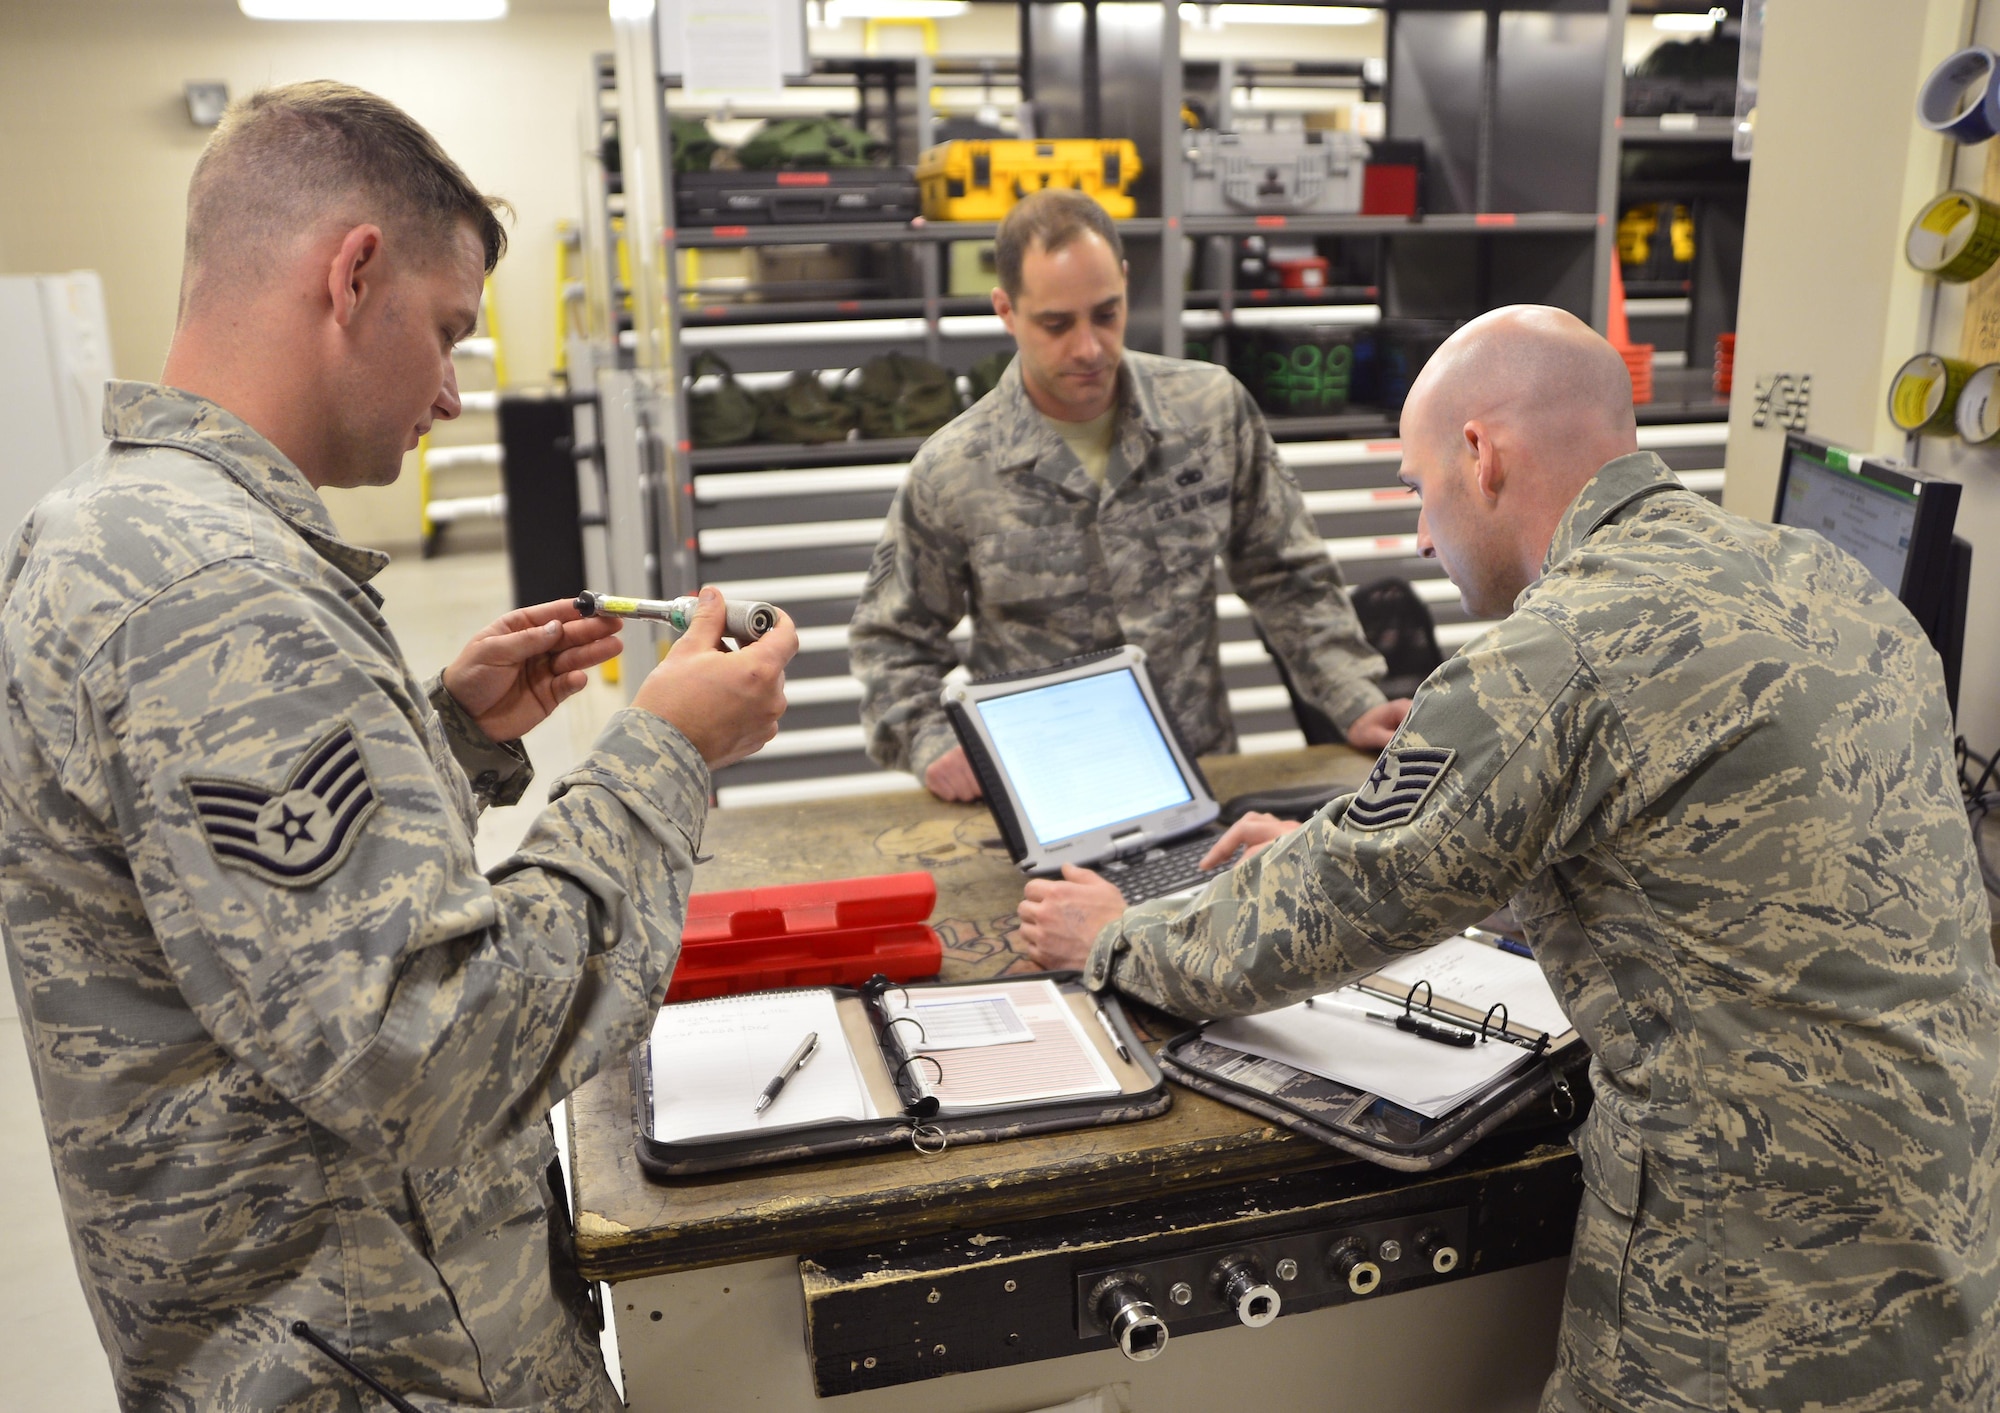 Staff Sgt. Ron, 432nd Maintenance Group quality assurance inspector, left, and Tech. Sgt. Bryan, 432nd Maintenance Group technical order distribution office, right, inspect a torque wrench and laptop May 3, 2016. QA inspects every aspect of maintenance performed on MQ-1 Predators and MQ-9 Reapers including the support shops to ensure Airmen have the right tools to complete the mission. (U.S. Air Force photo by Senior Airman Christian Clausen/Released)